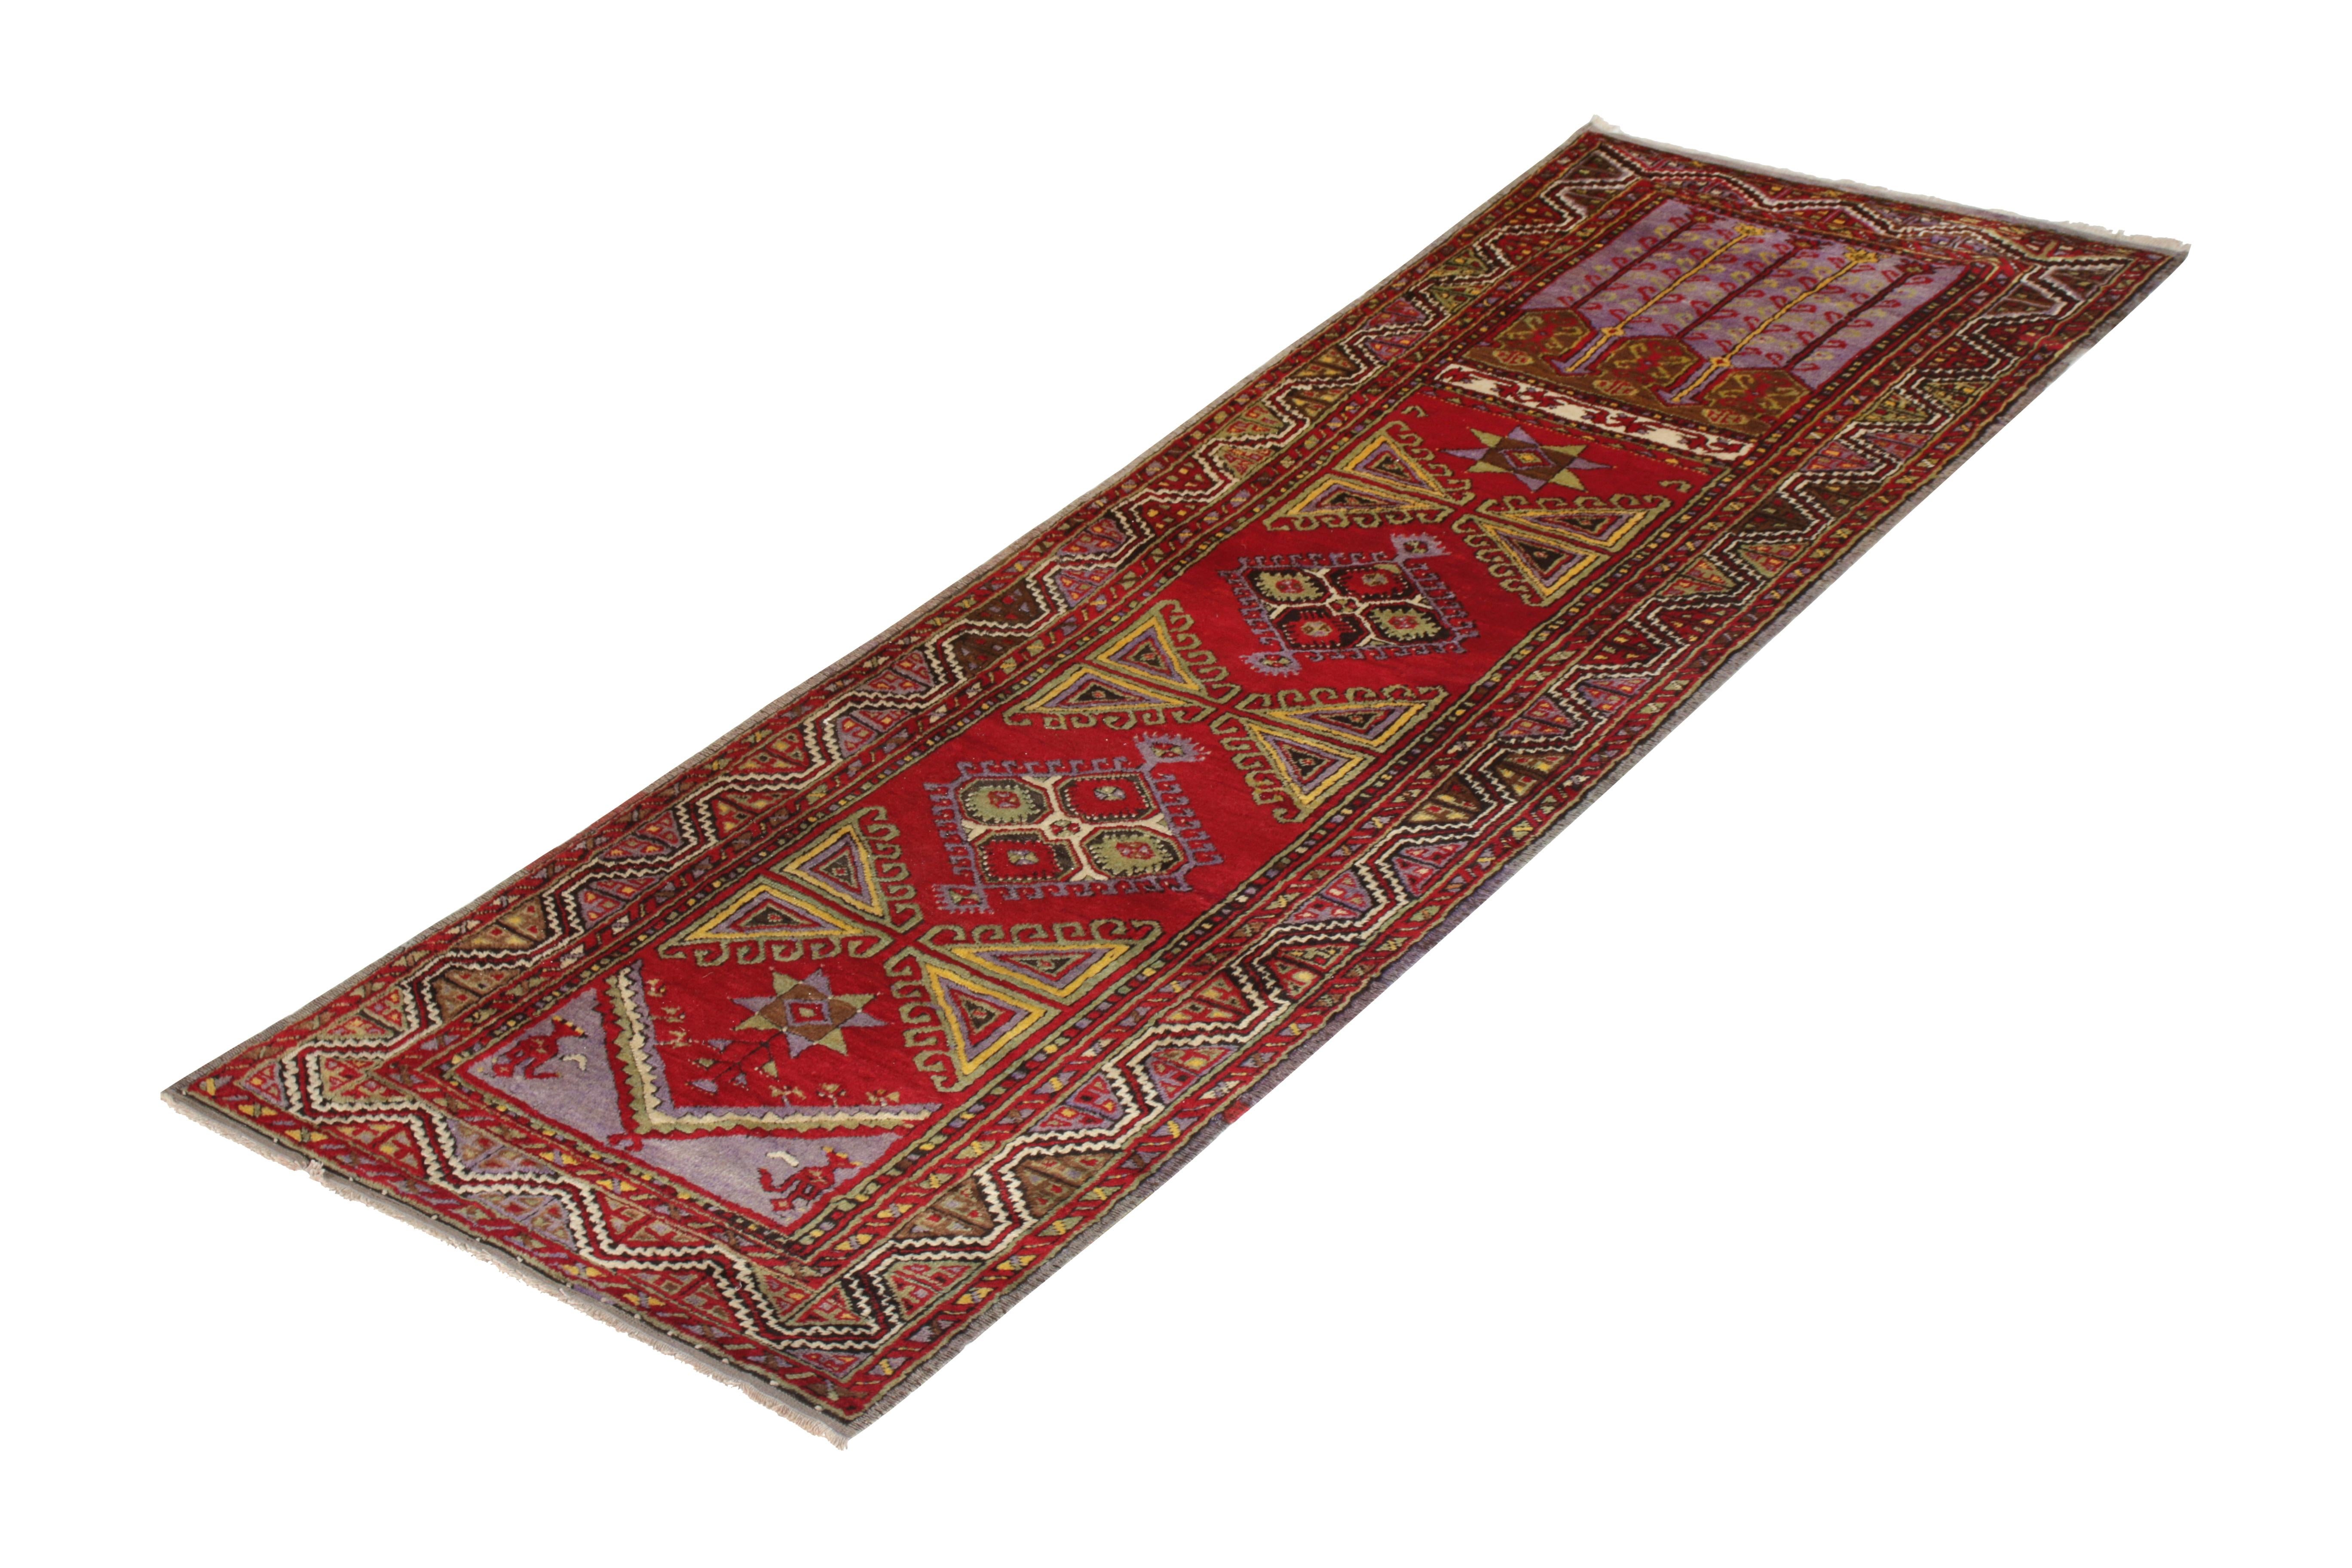 A midcentury vintage Kirsehir Turkish pile rug, this runner comprises wool for its colorful red foundation and complementary purple, pink, green and yellow details. This vintage Turkish runner originated circa 1950-1960 with a vibrant appearance